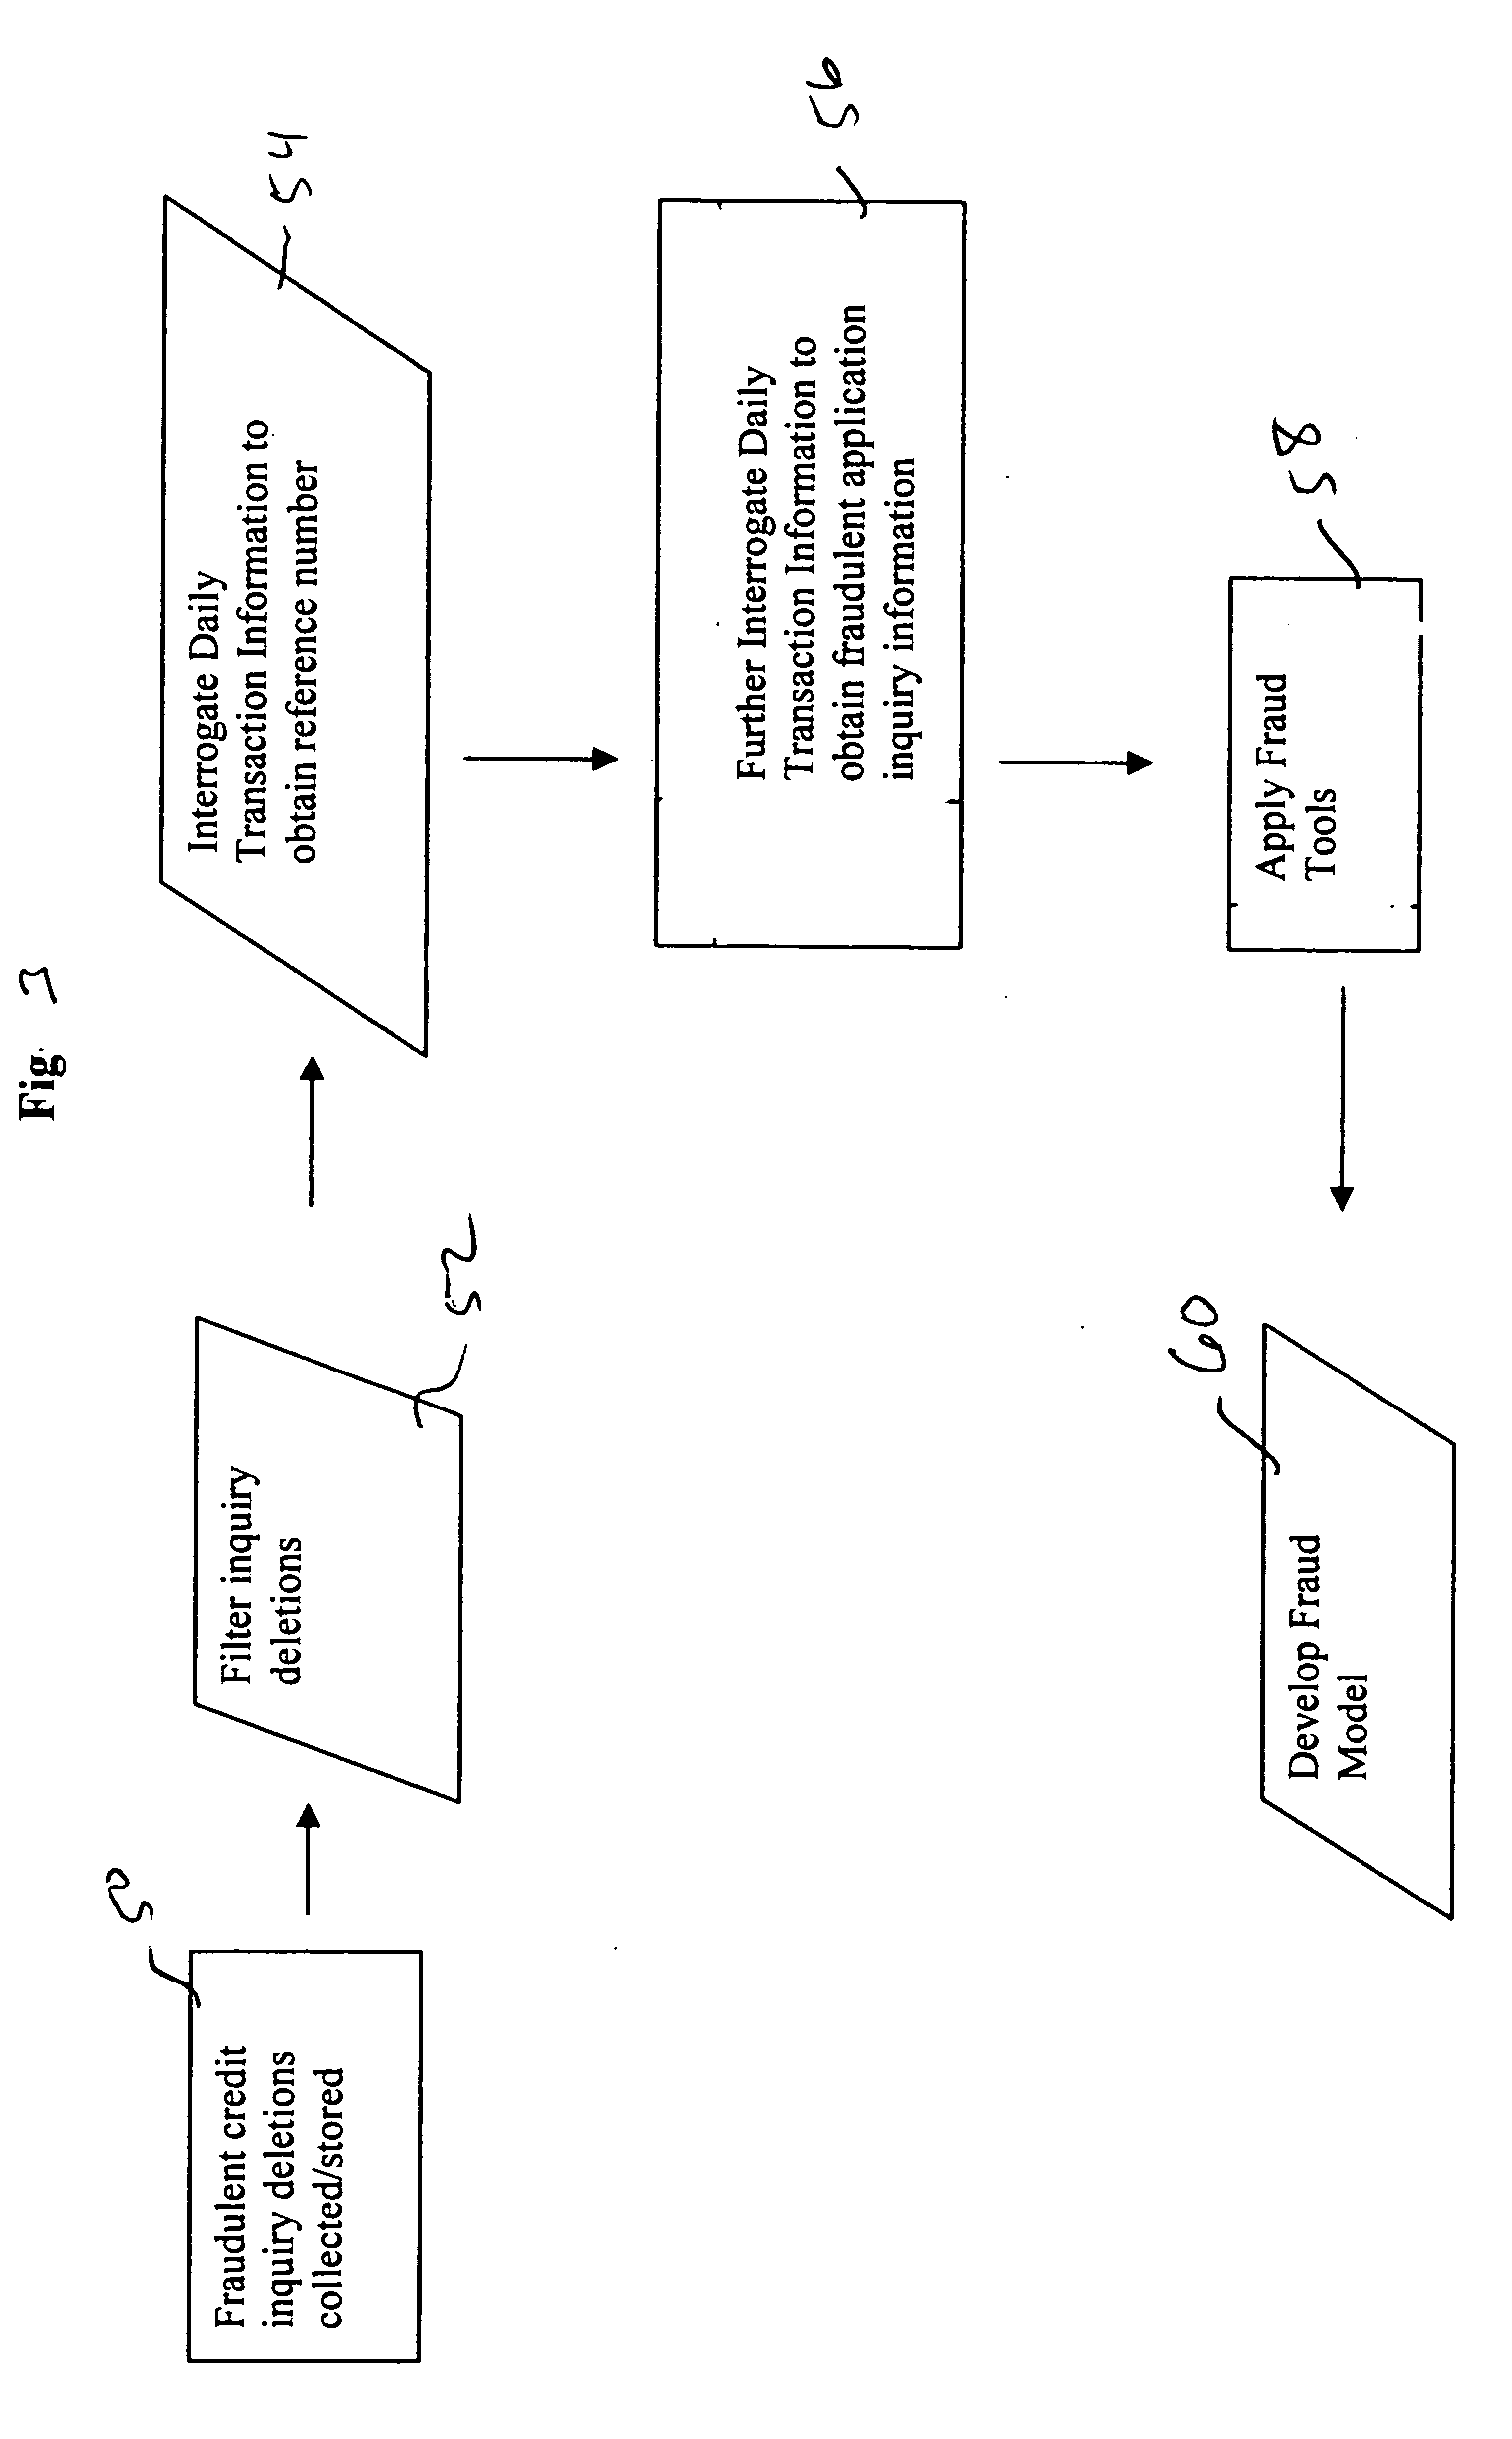 System and method for developing an analytic fraud model